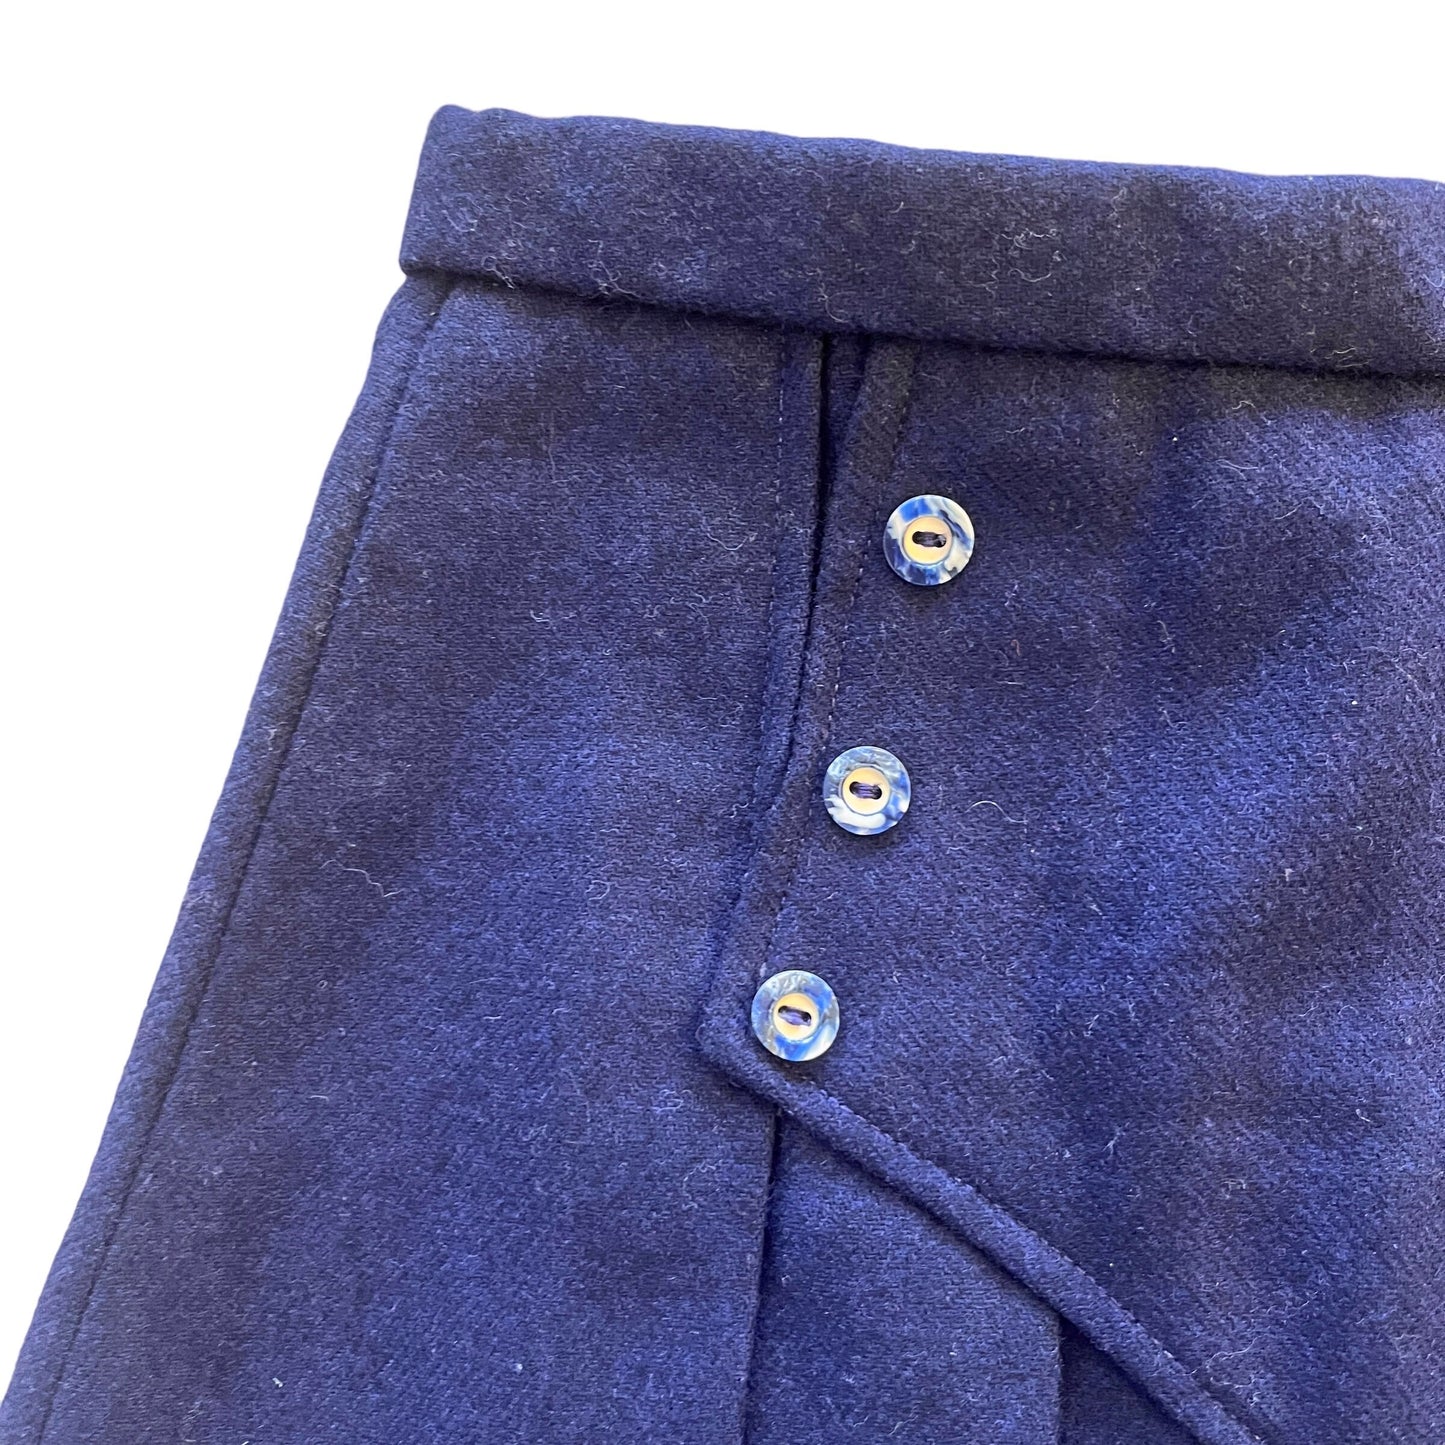 1960's Navy Pleated Skirt / 4-5Y